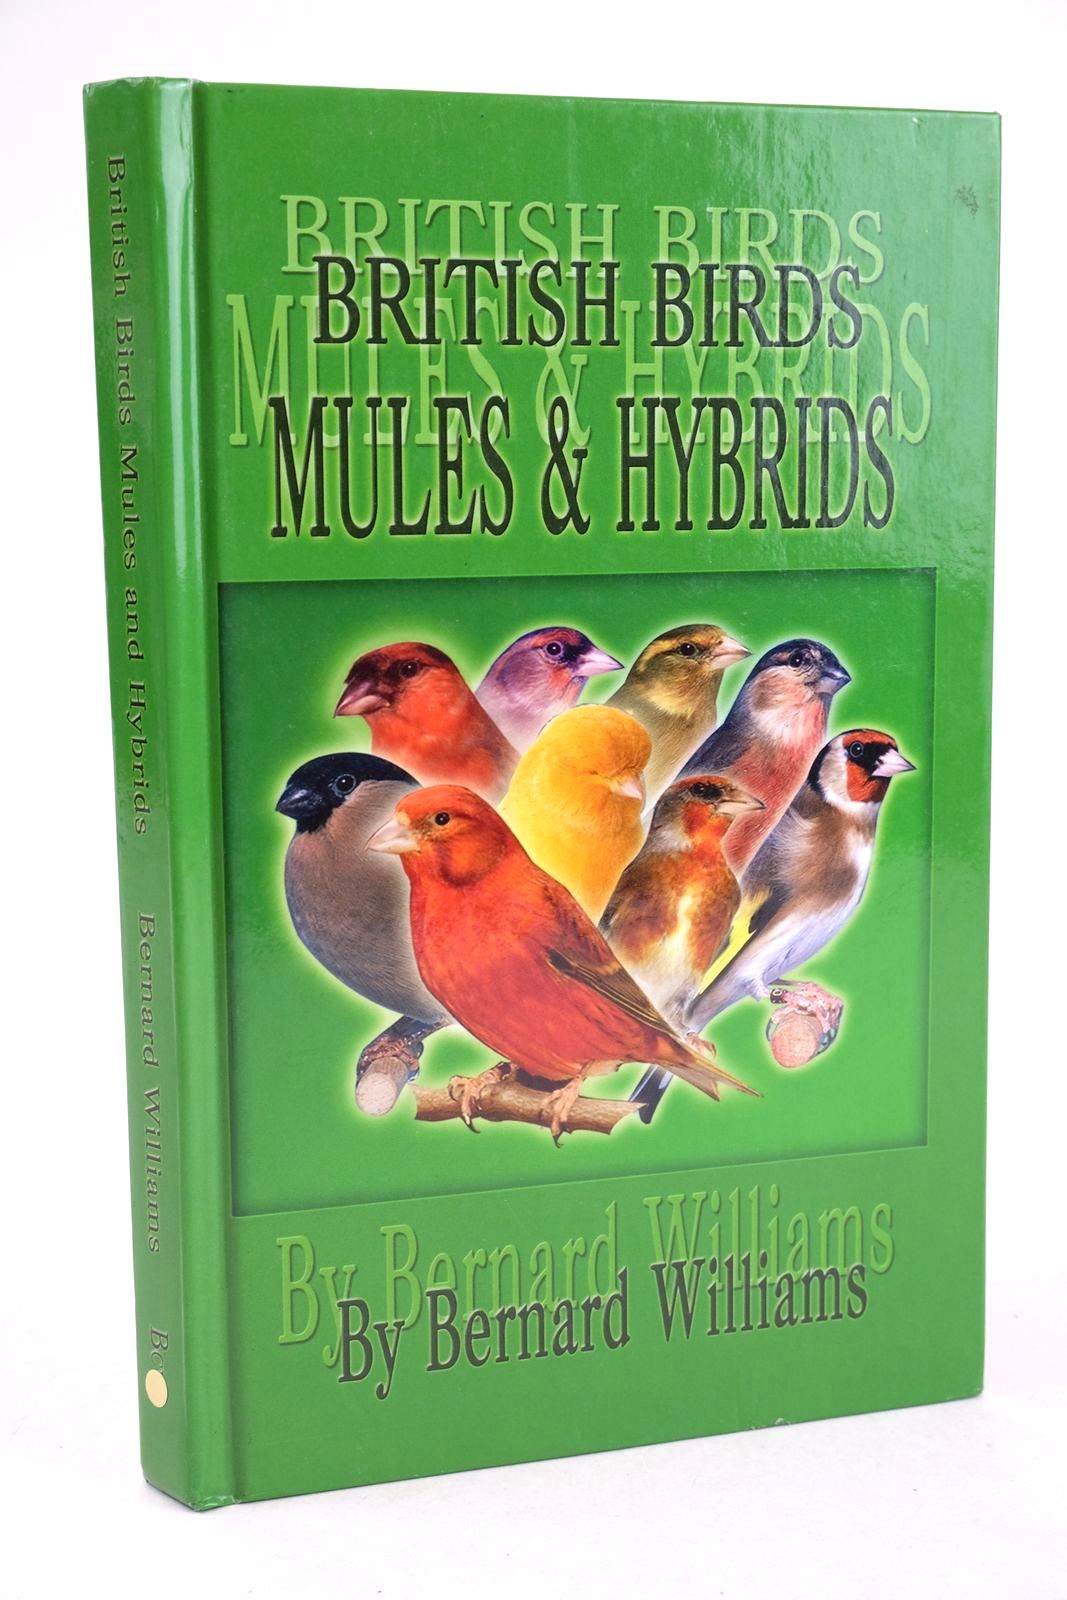 Photo of BRITISH BIRDS: MULES AND HYBRIDS written by Williams, Bernard published by B.C. Williams (STOCK CODE: 1325859)  for sale by Stella & Rose's Books